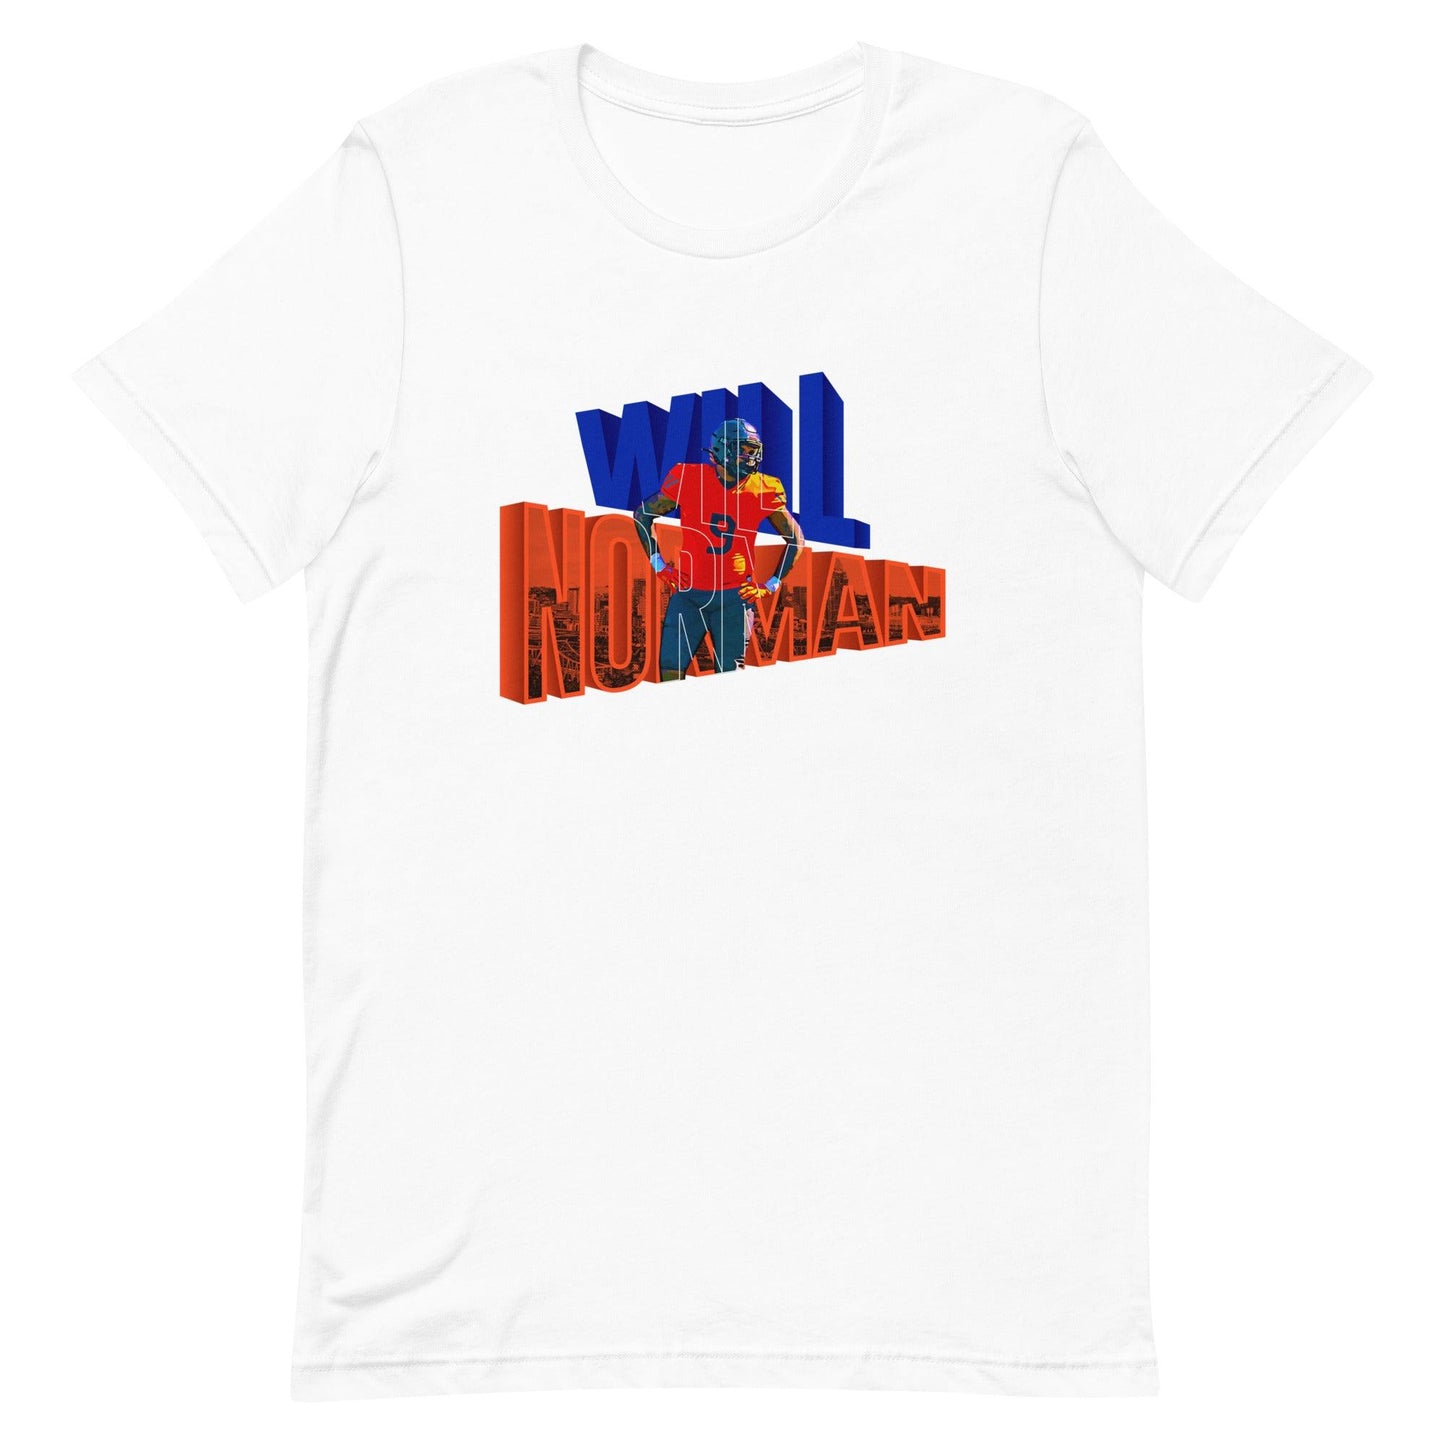 Will Norman "Signature" t-shirt - Fan Arch